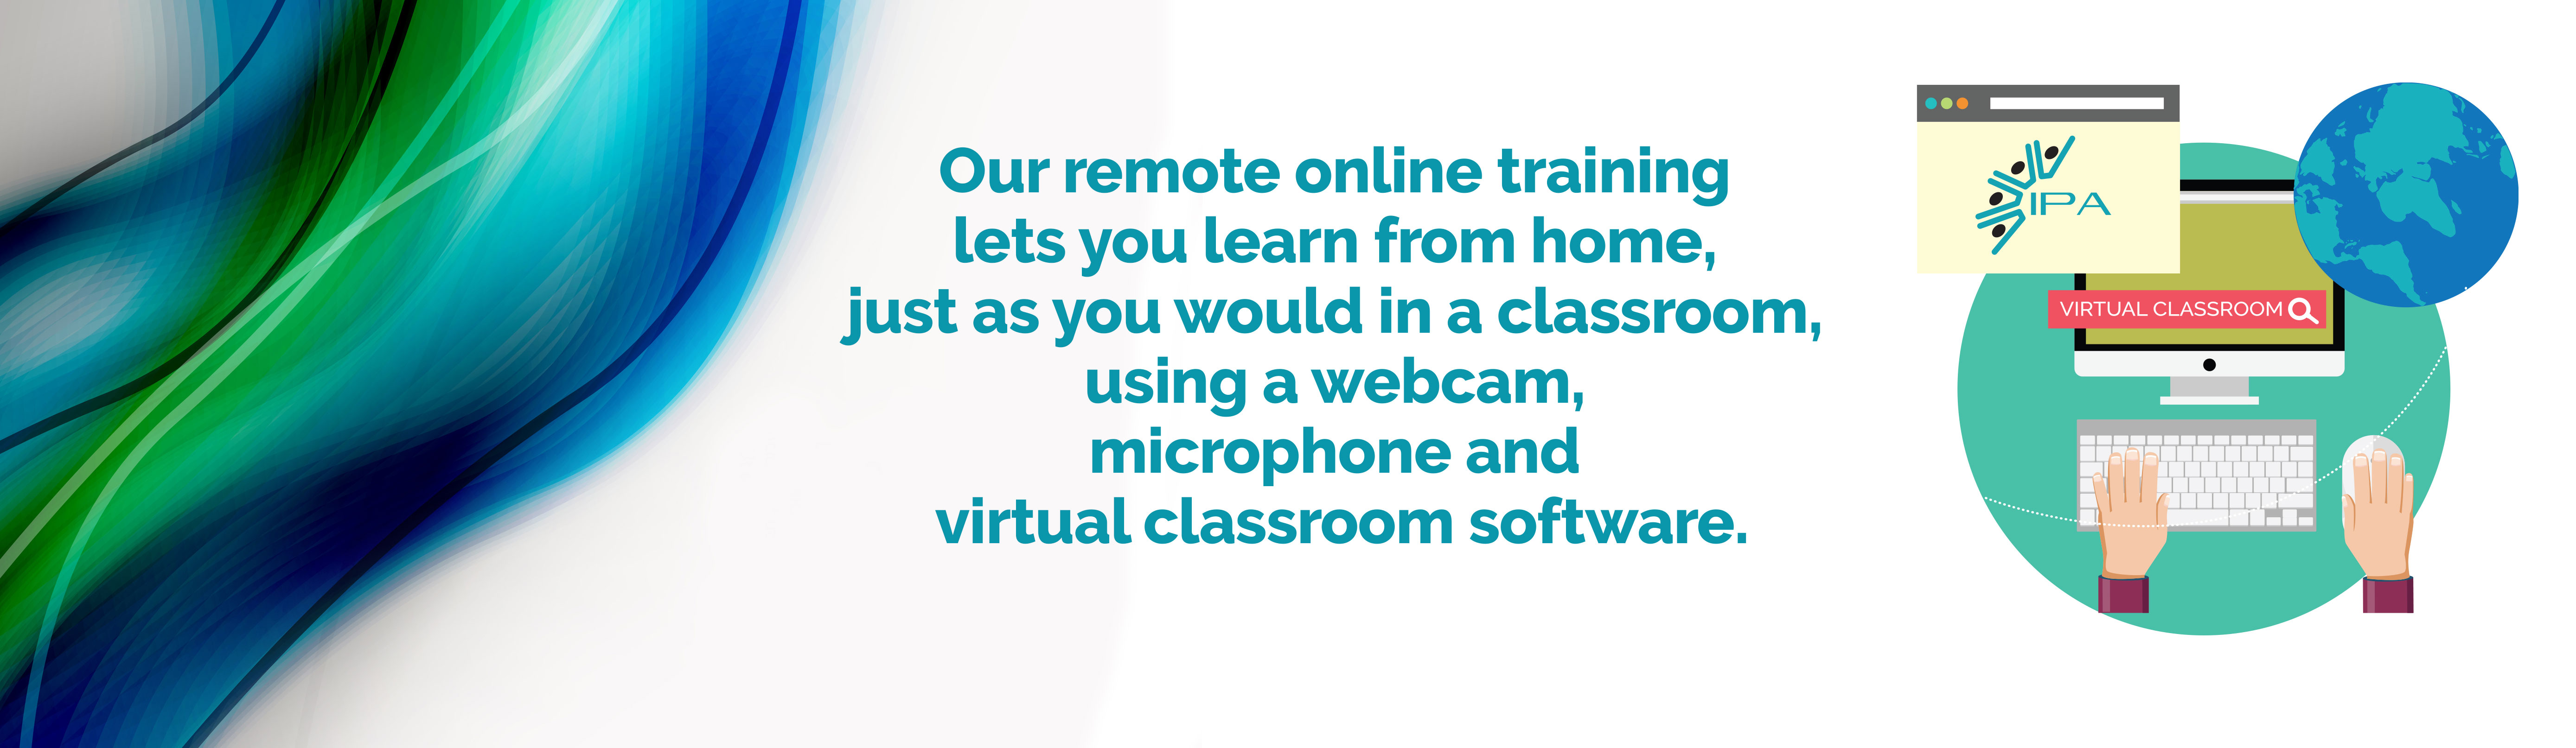 we are offering 20% off the course fees for all virtual classroom training